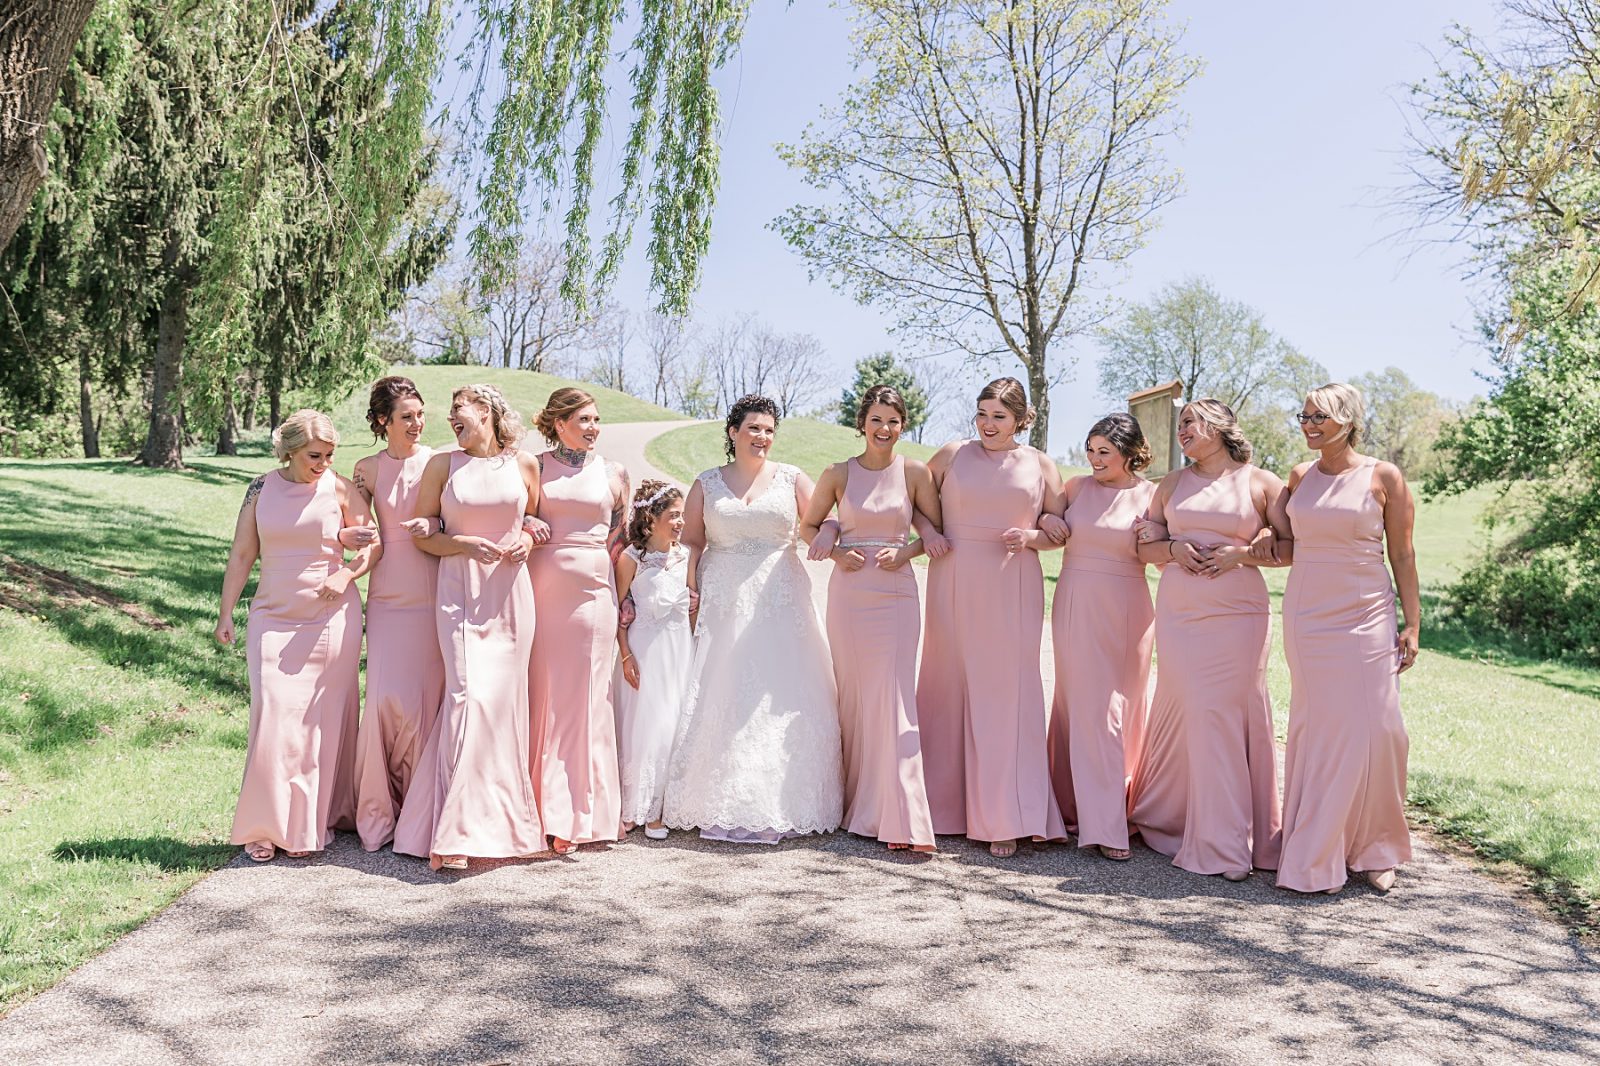 Wedding photography by Diana Gramlich, Bride with bridesmaids in blush Allure dresses walking on a road arms linked